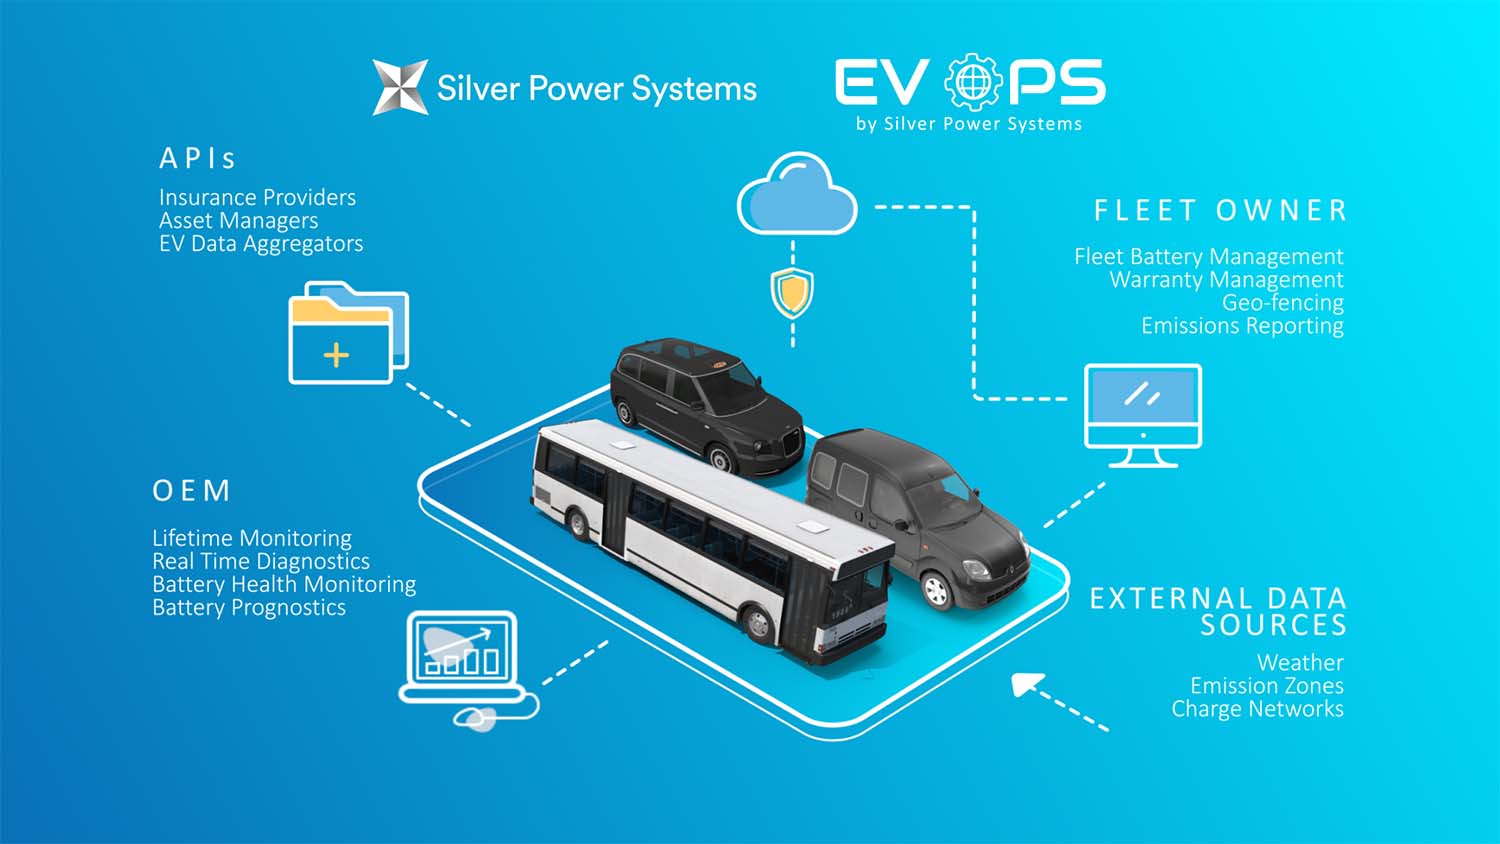 Pioneering EV Trial Results In World’s Most Advanced Battery ‘digital Twin’ Capable Of Predicting Battery Lifetime